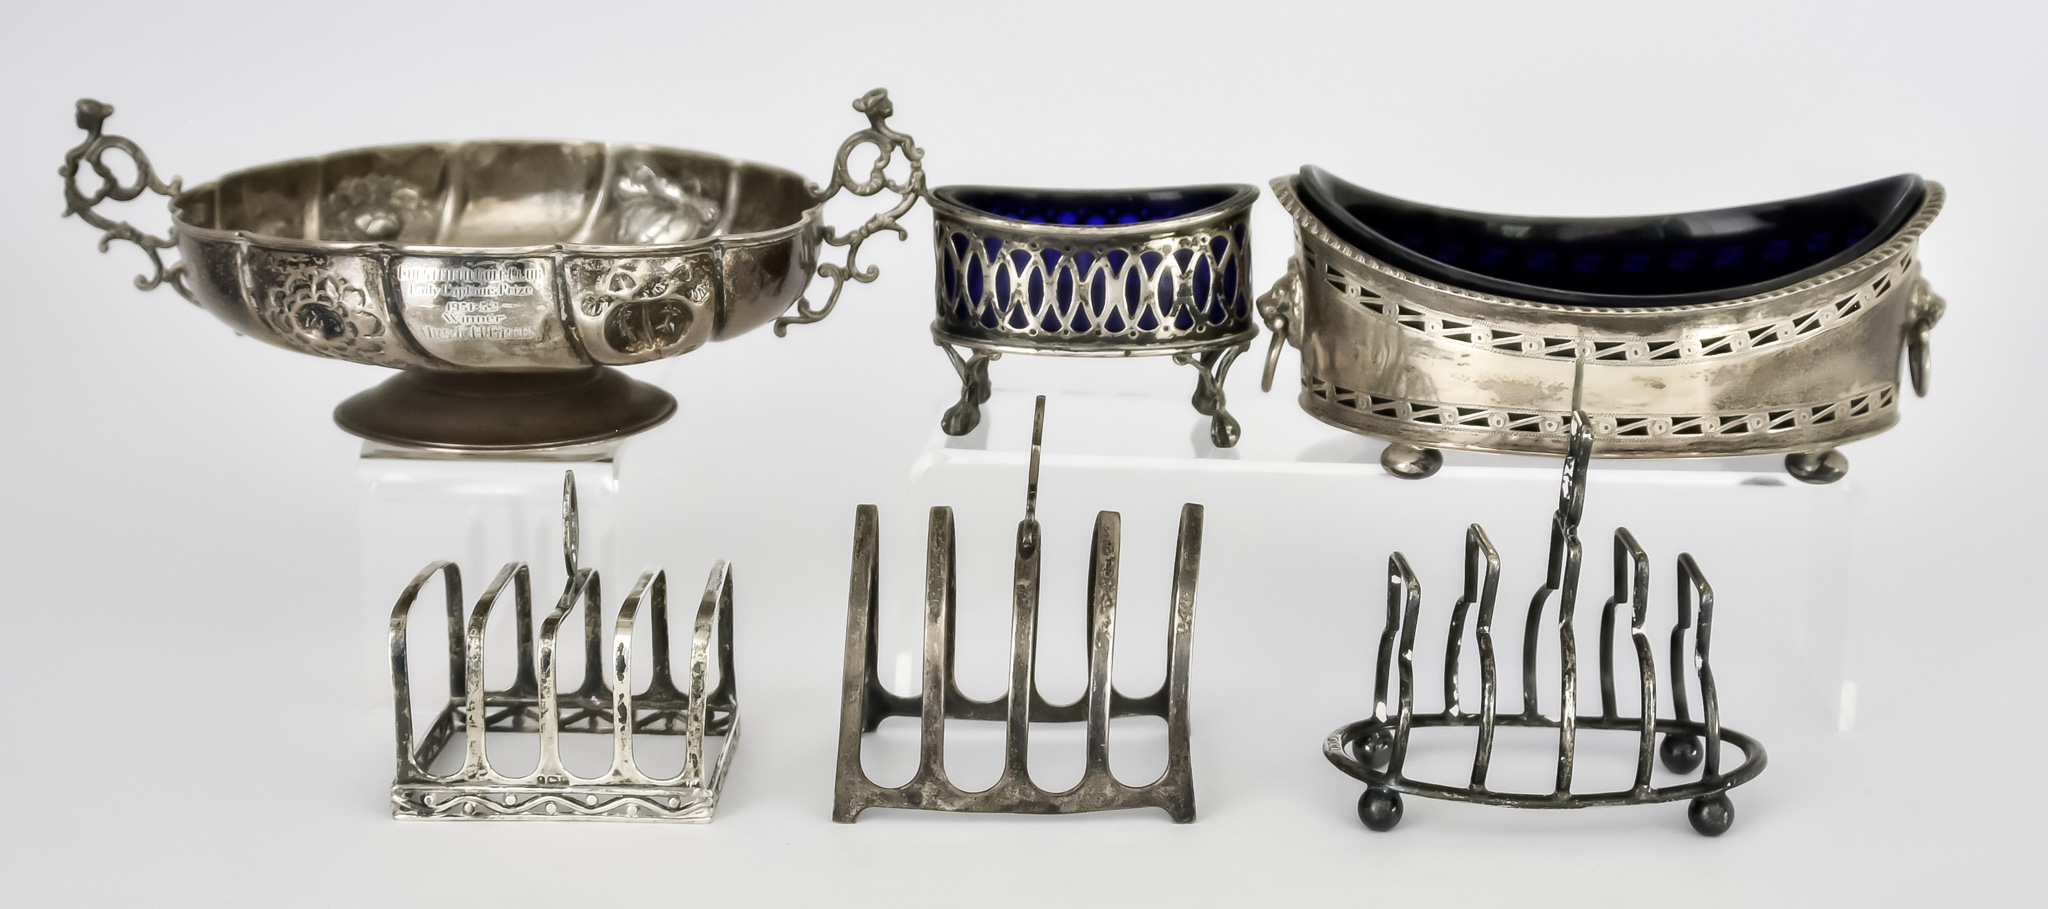 An Edward VII Silver Circular Two-Handled Shallow Bowl and Mixed Silver Ware, the shallow bowl by